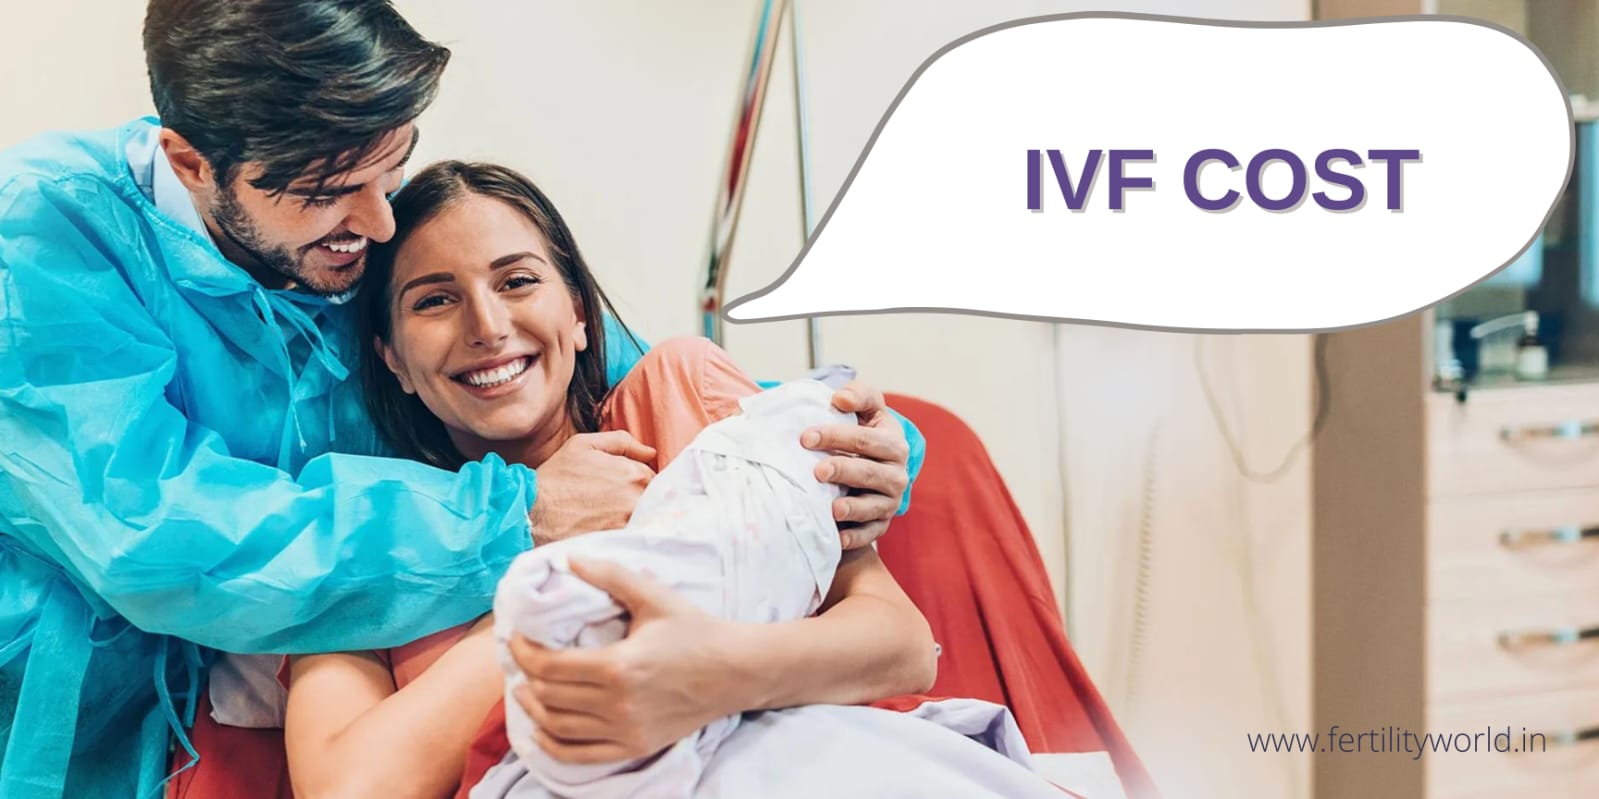 How much does IVF cost in the UK?